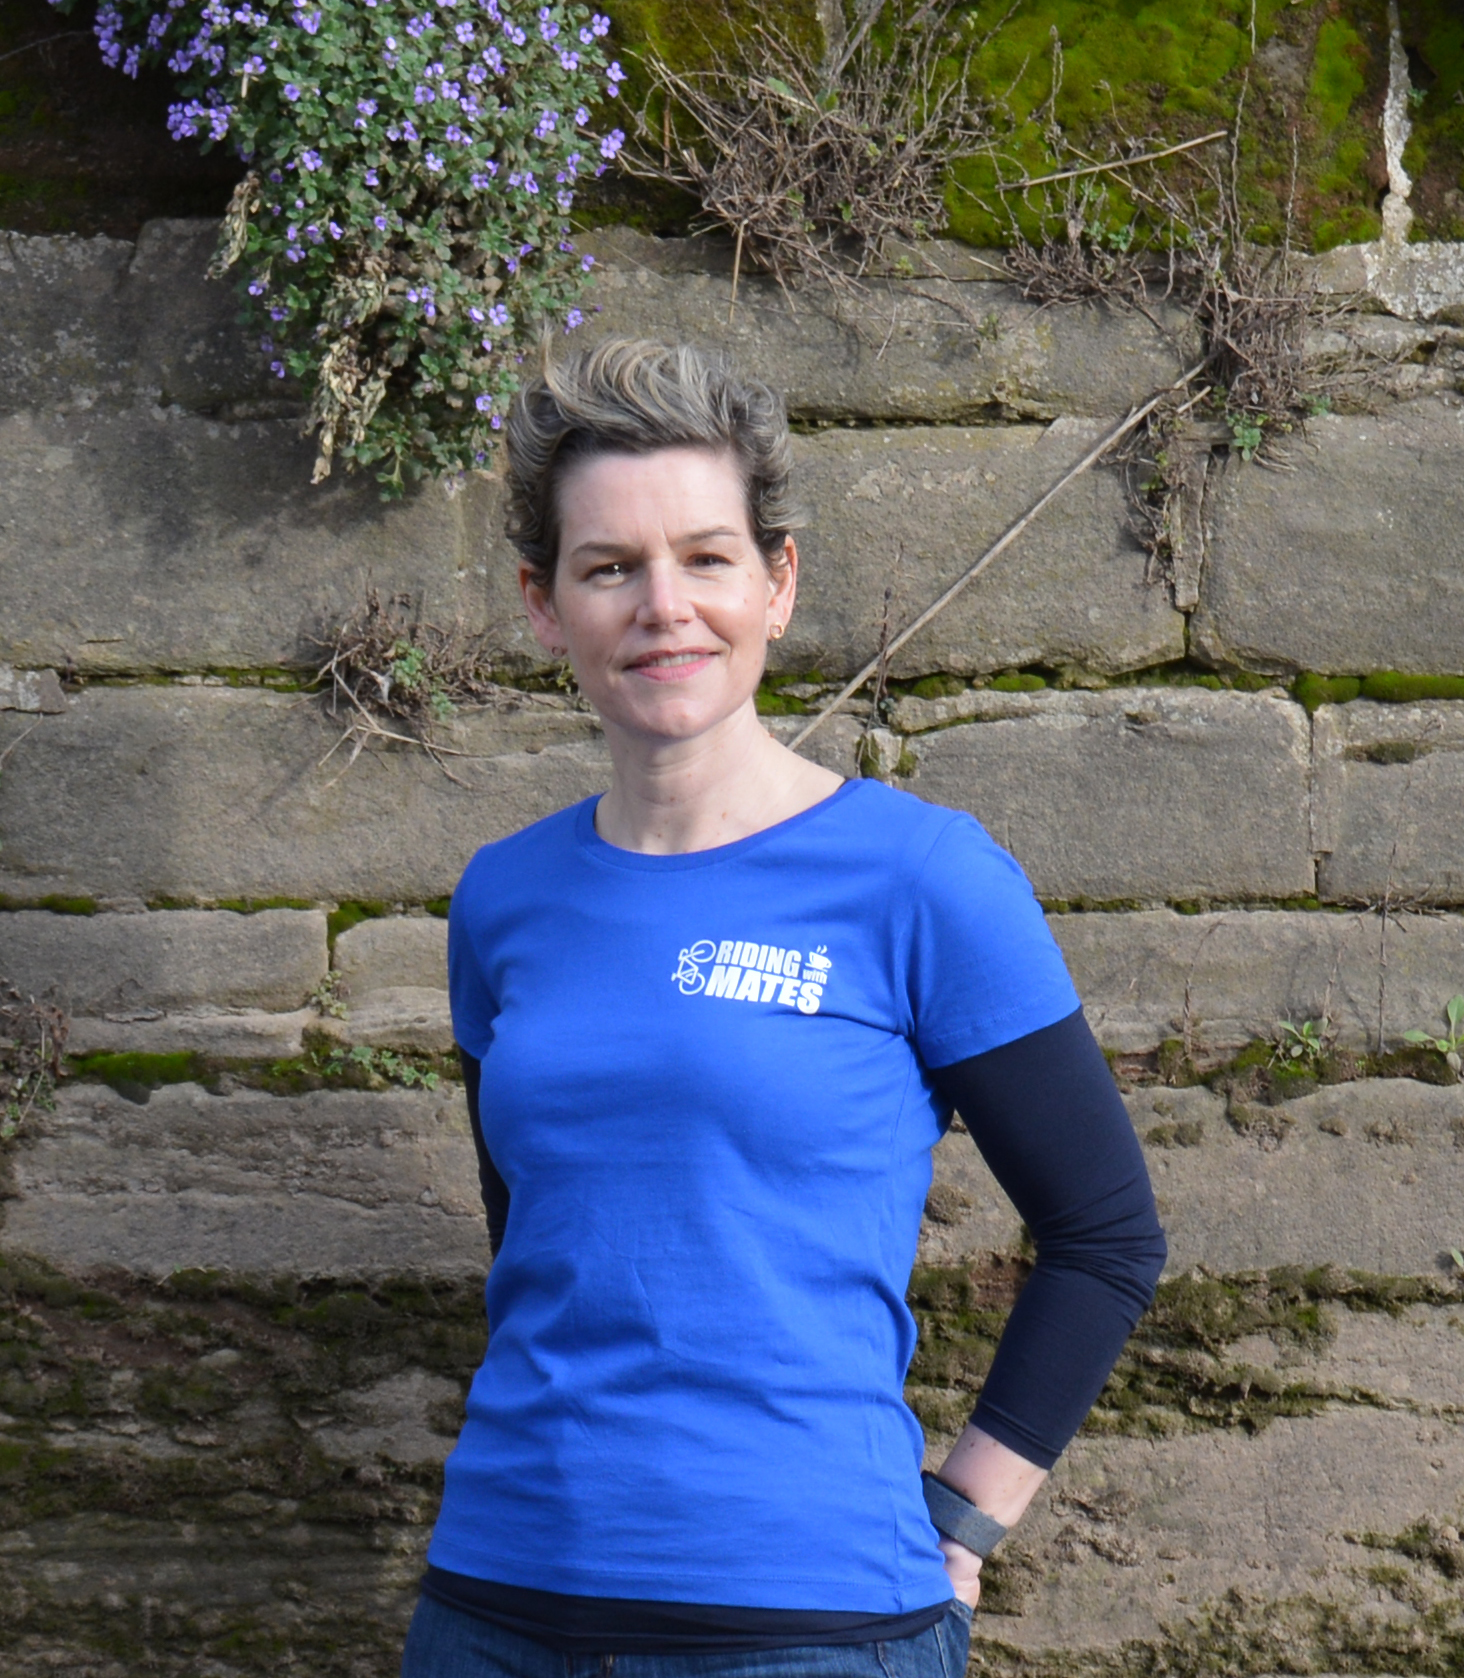 Jenny models our womens Riding With Mates t-shirt